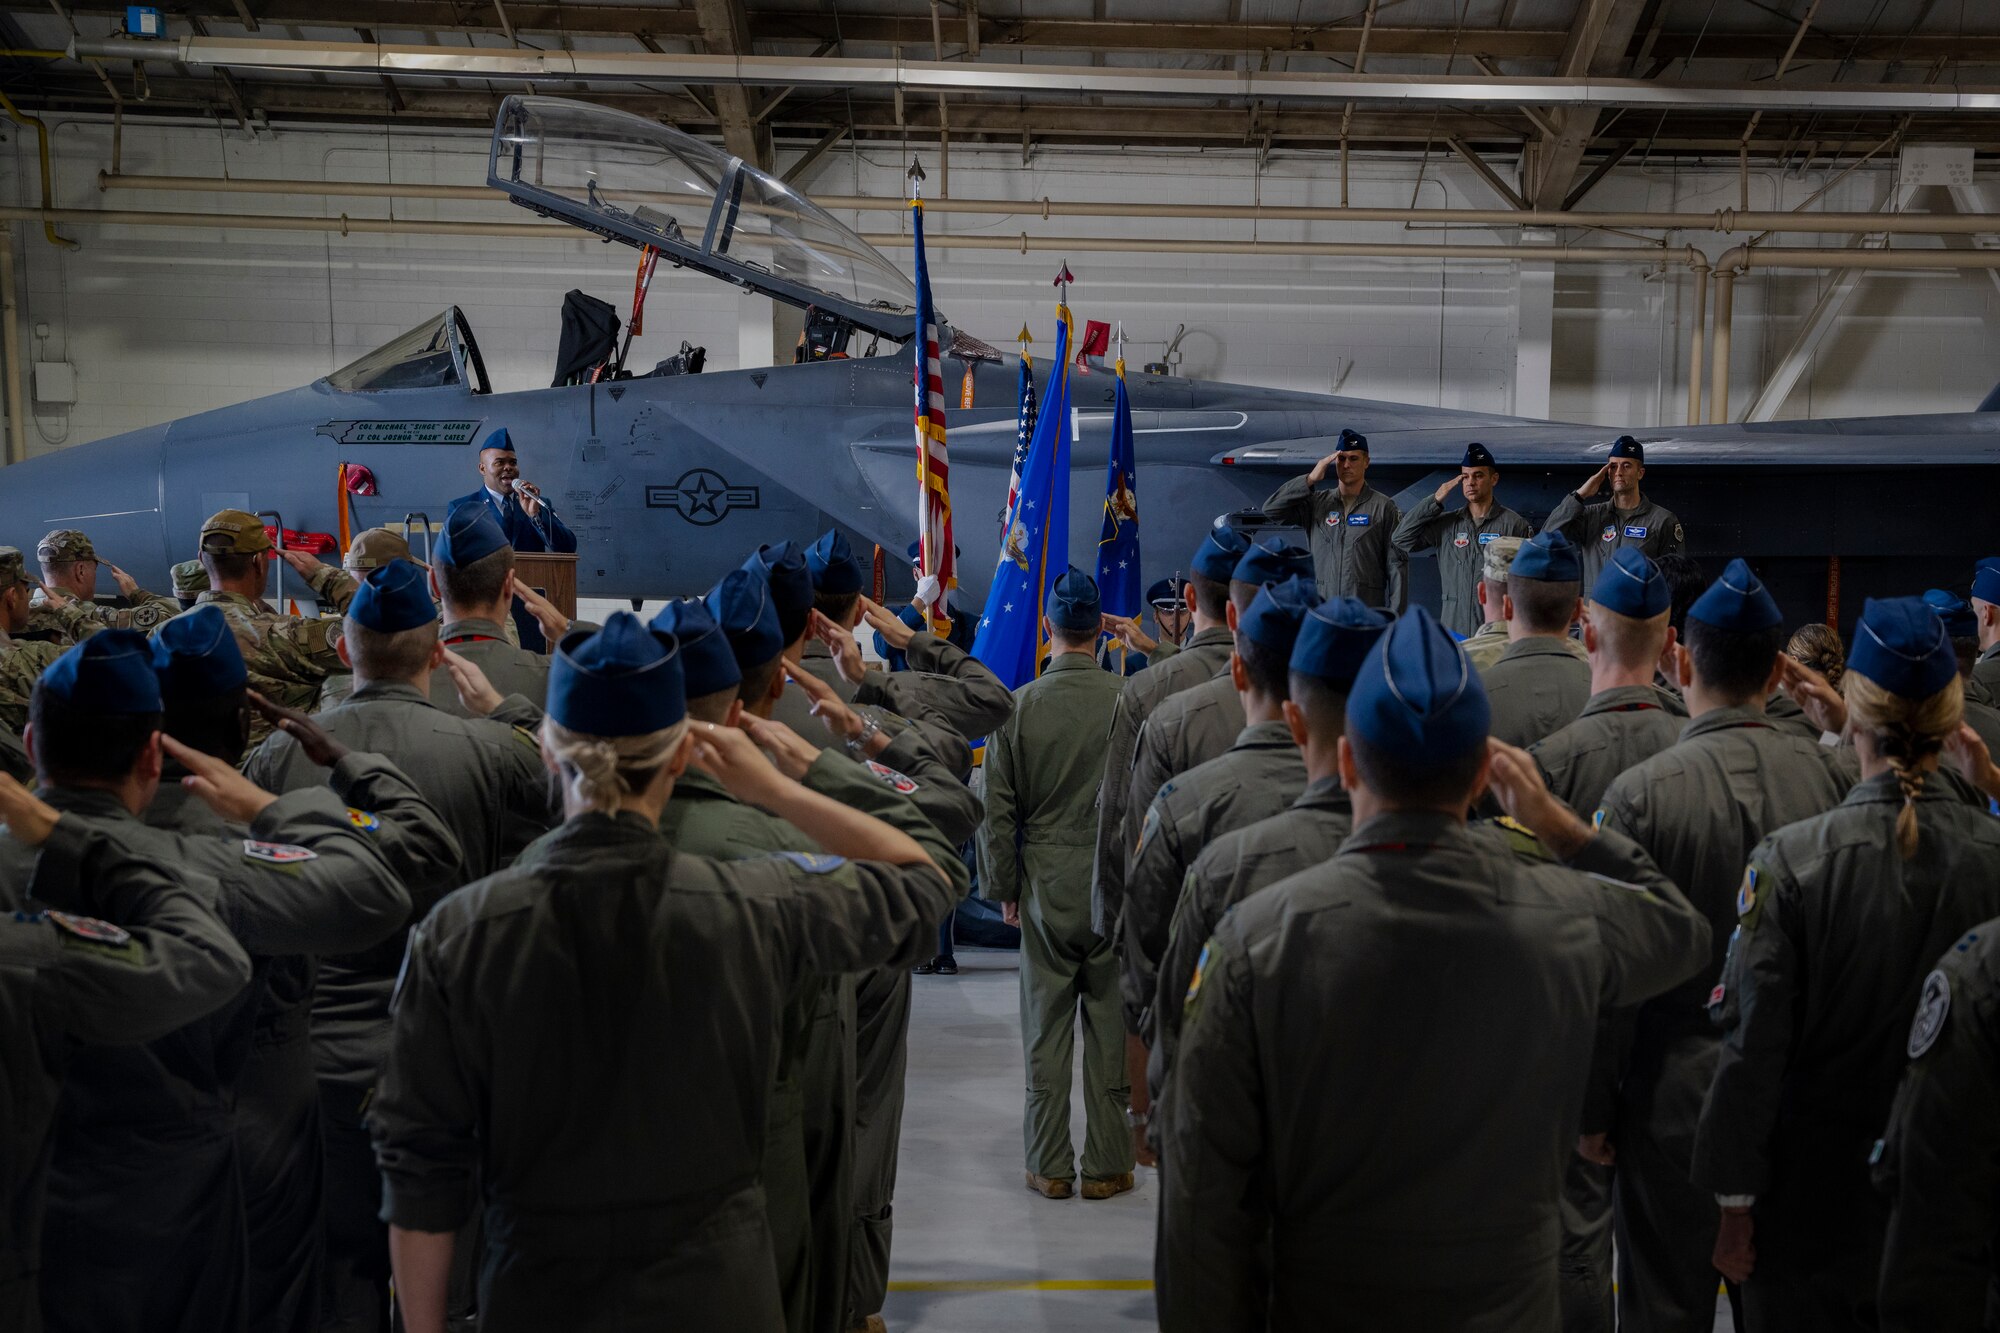 The ceremony was conducted to commemorate the passing of command of the 4th Operations Group from Col. Michael Alfaro, former commander of the 4th OG. (U.S. Air Force photo by Senior Airman Kylie Barrow)